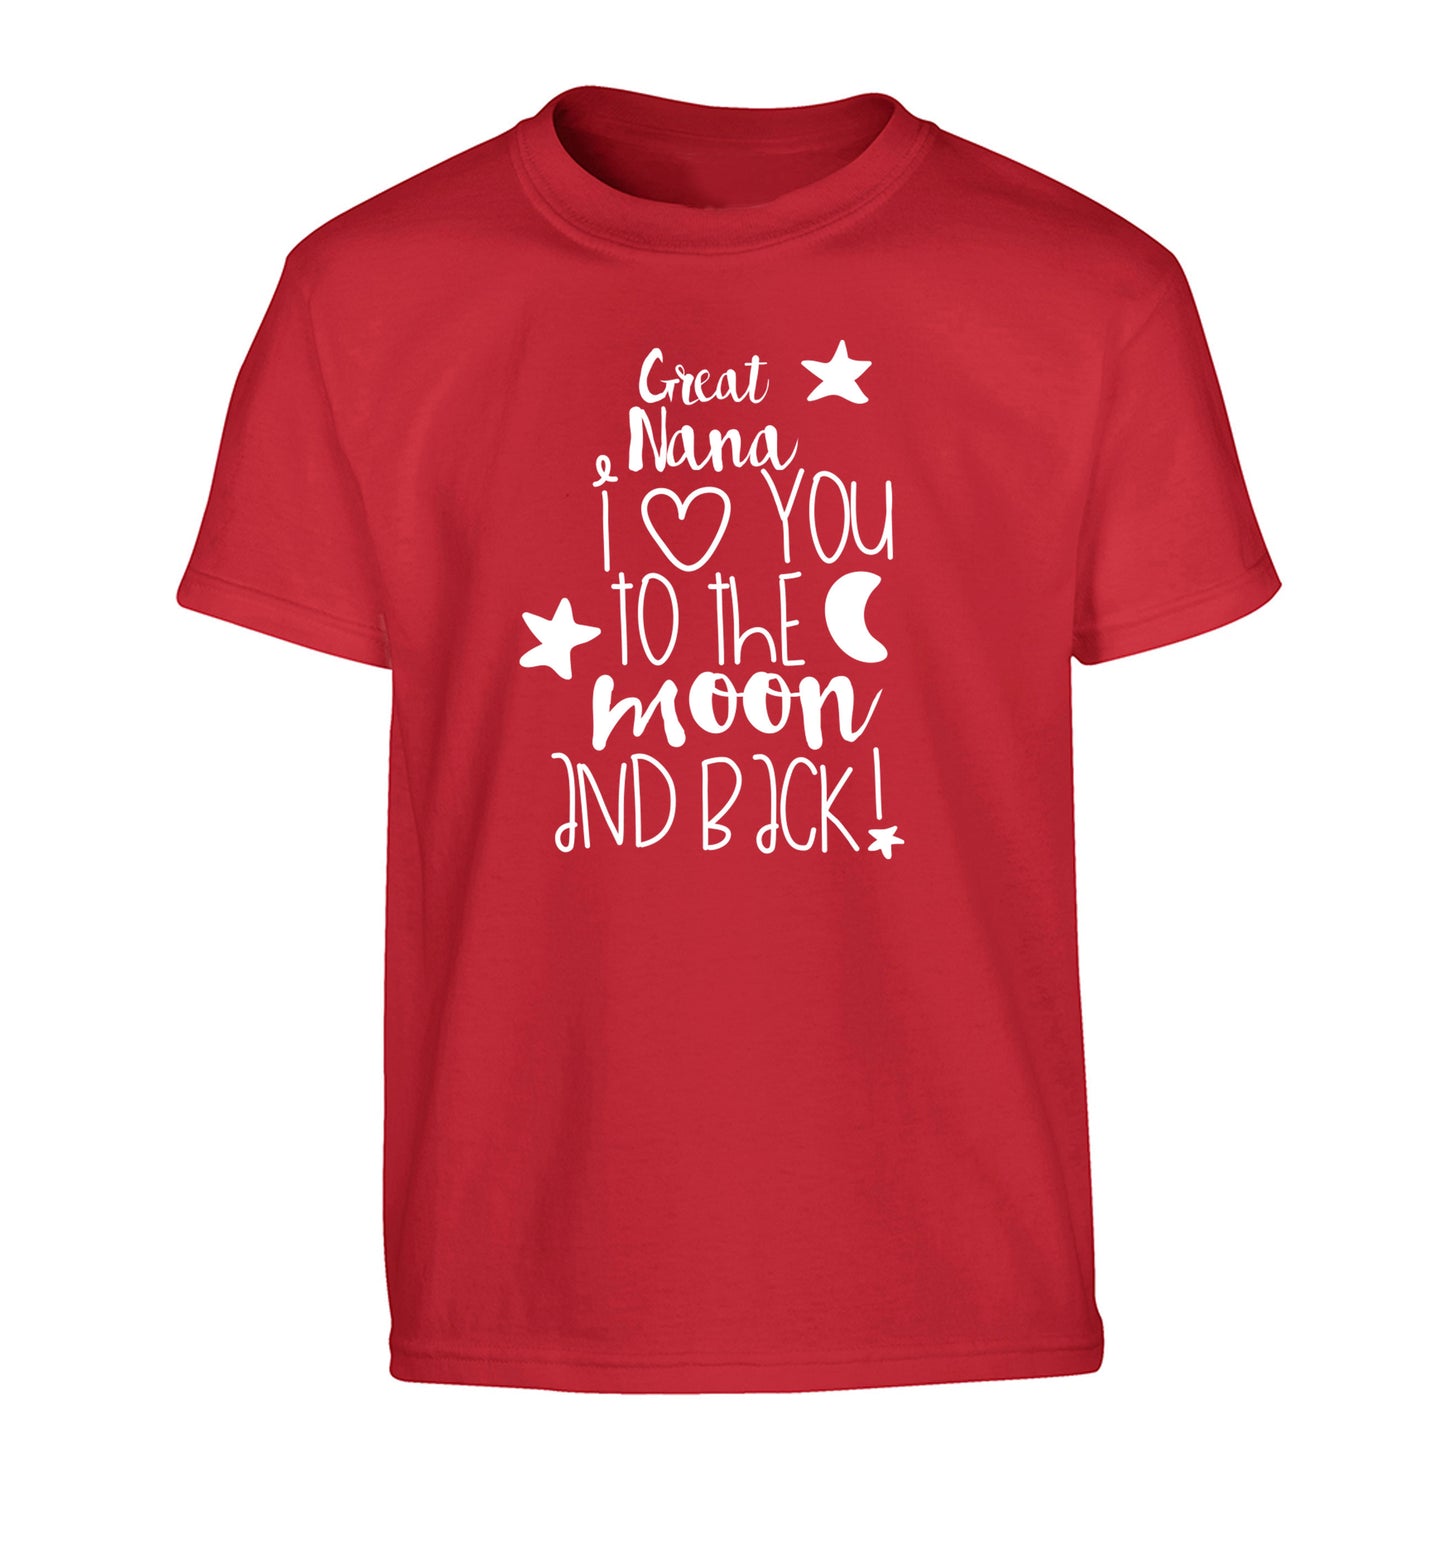 Great Nana I love you to the moon and back Children's red Tshirt 12-14 Years